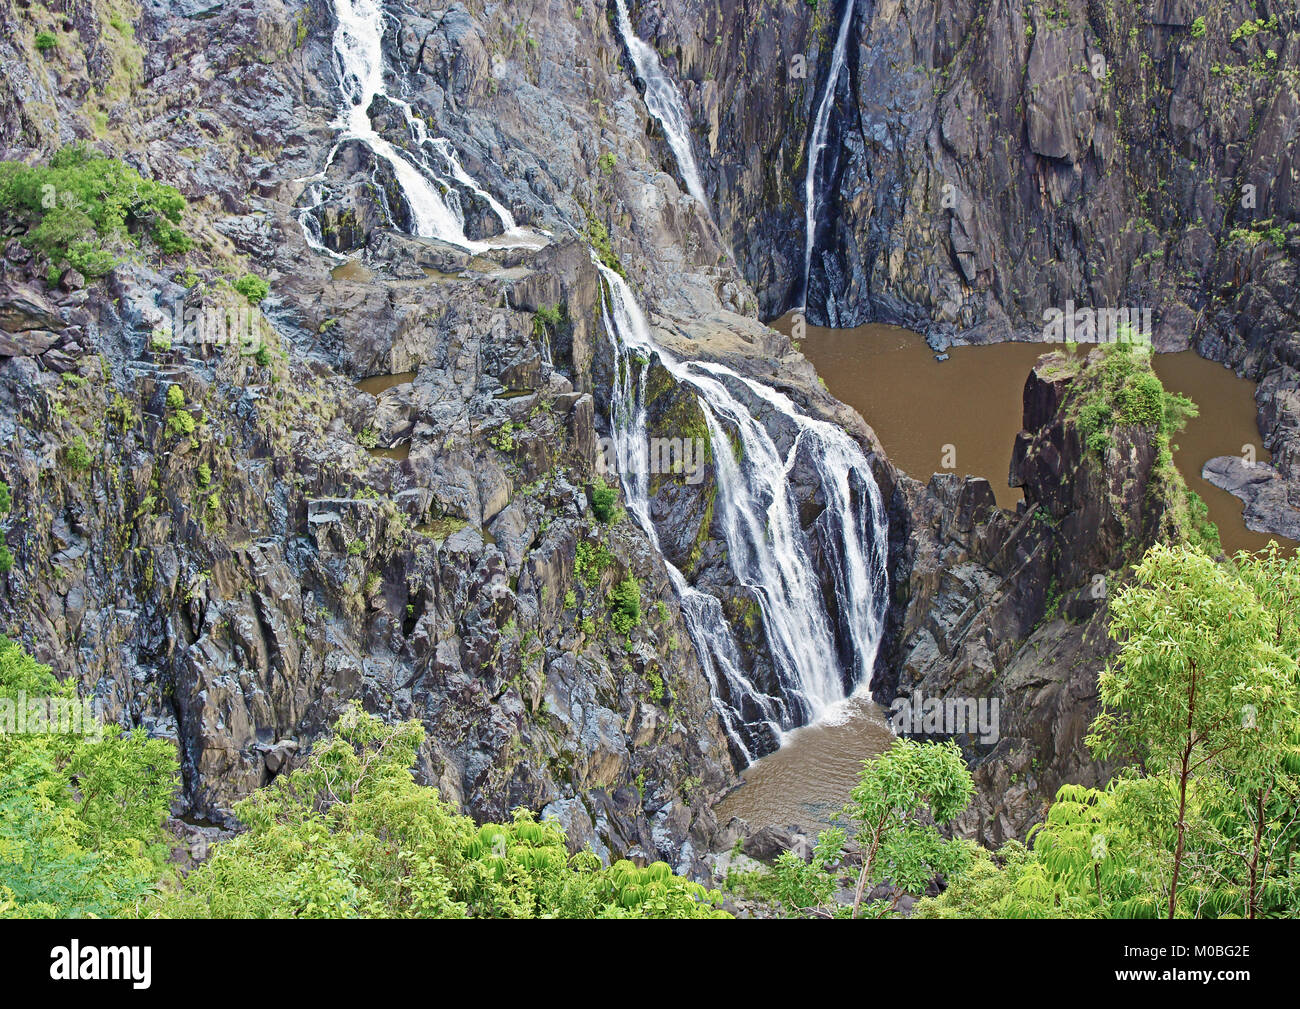 A decent wet season amount of water flowing over the lower tiers of the Barron River Falls in the Barron Gorge National Park near Kuranda, Queensland Stock Photo